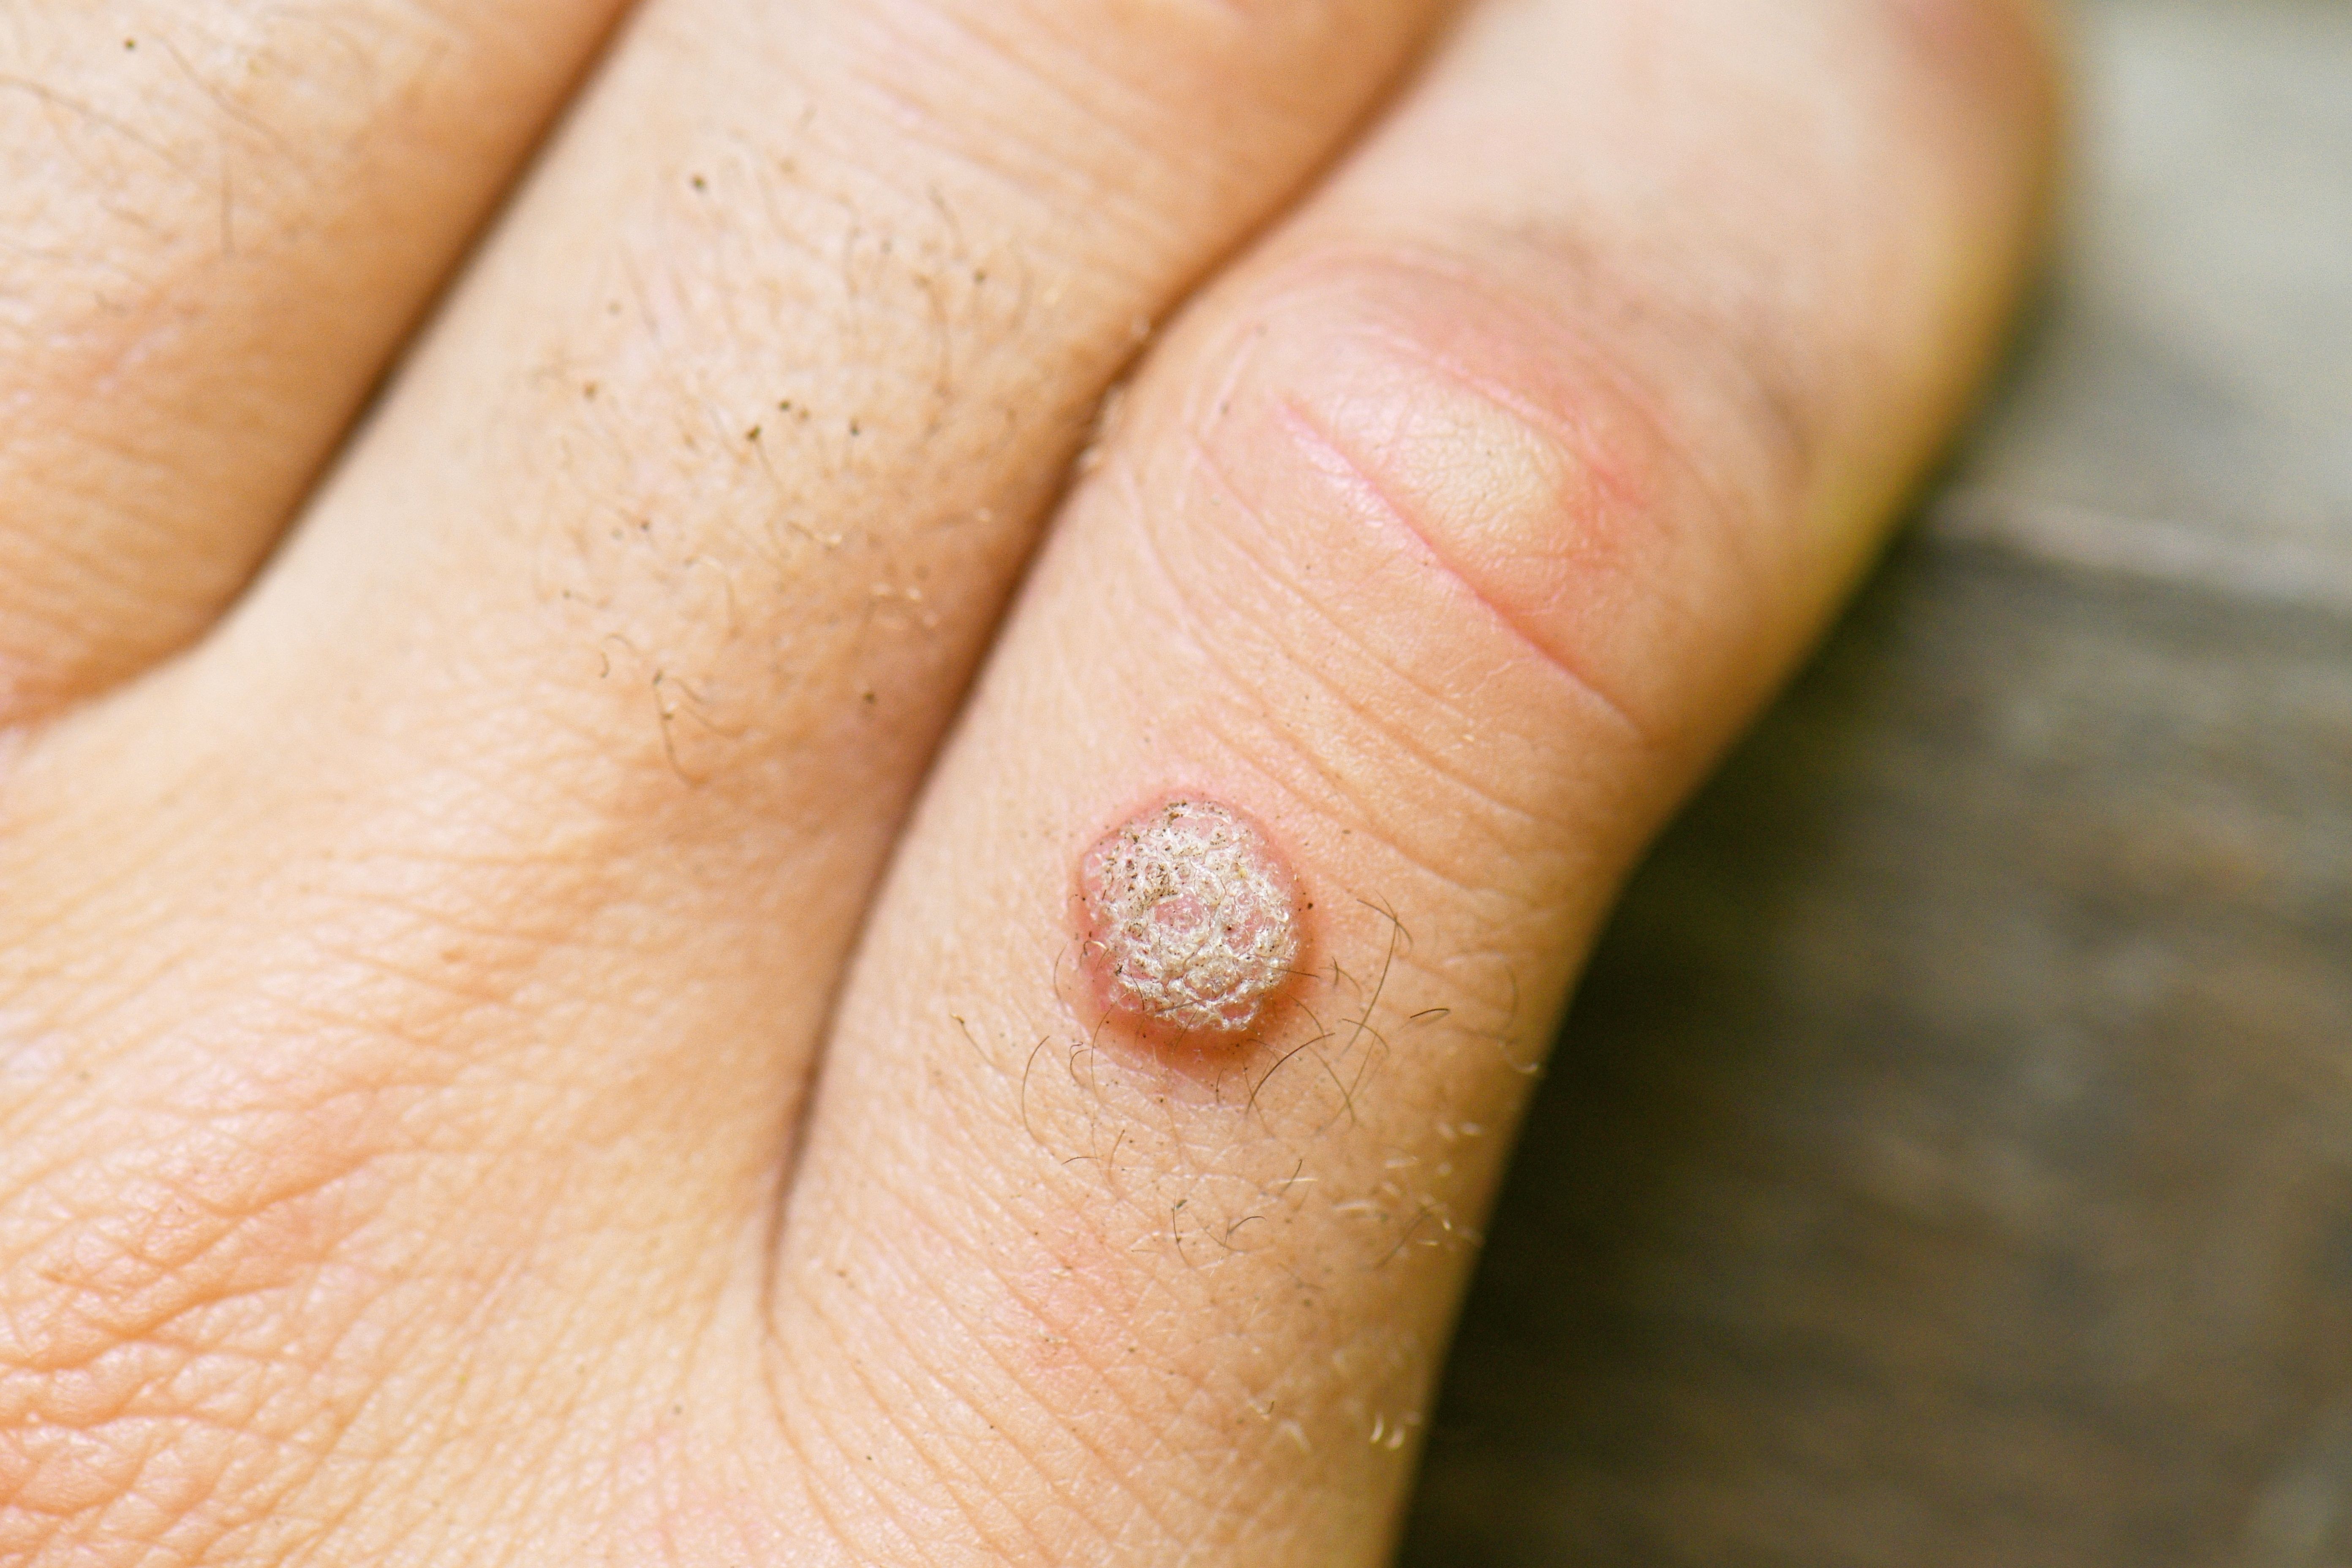 wart remover on skin cancer